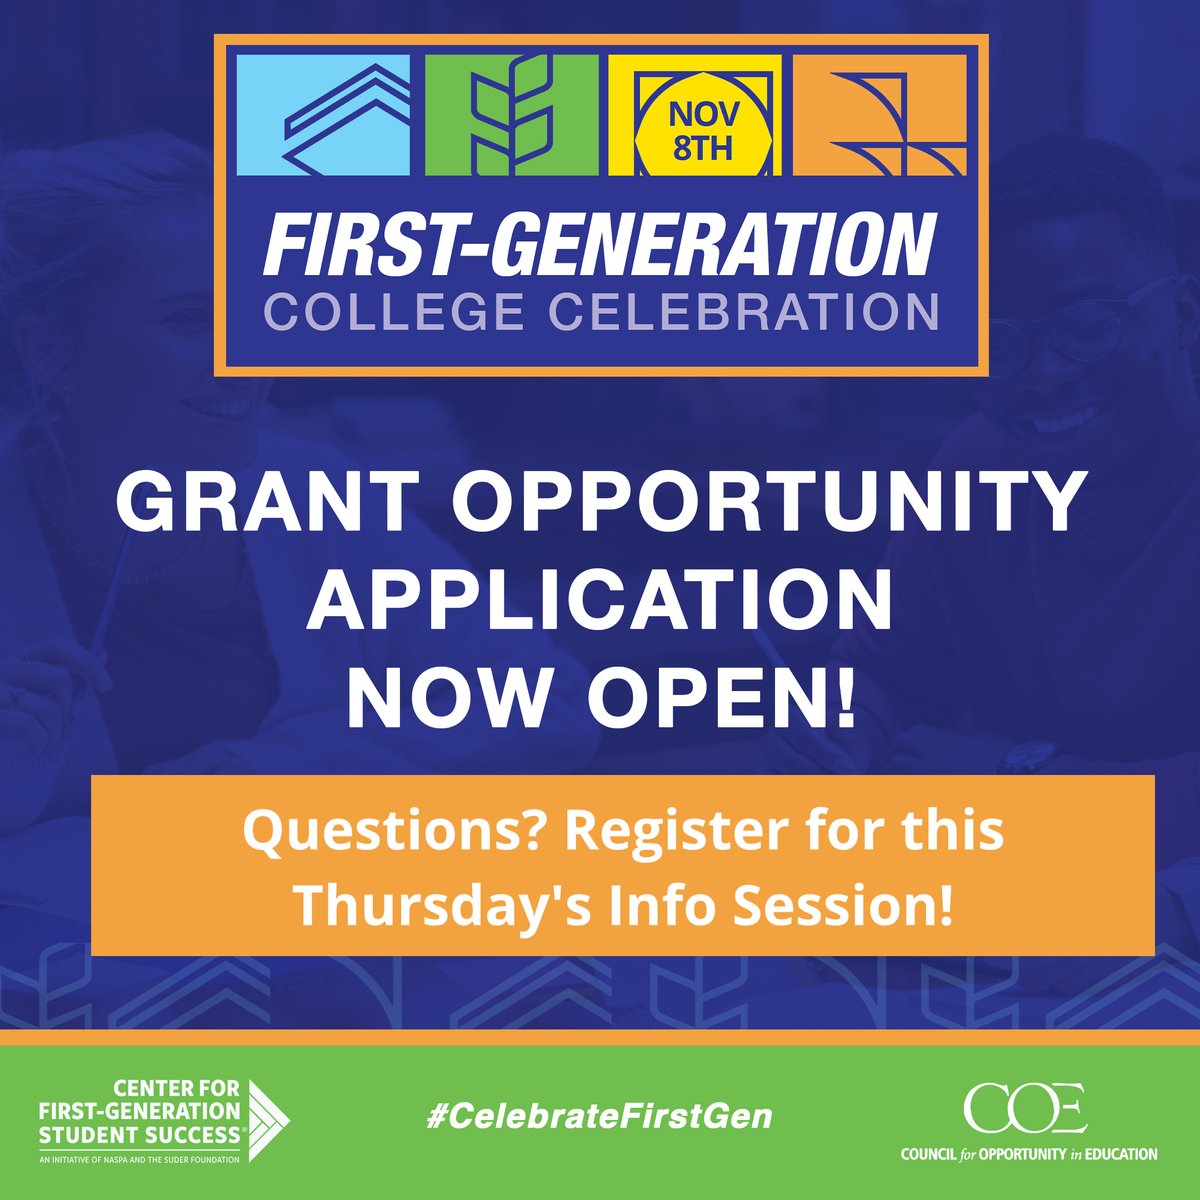 Do you have questions about the #CelebrateFirstgen grant opportunity? Then join us next Thursday, April 18, from 1-2 pm ET for an Info Session! We'll cover it all! Register for this FREE session at bit.ly/3UbkQib. Apply for the grant by 7/11 at bit.ly/CelebrateFirst…!